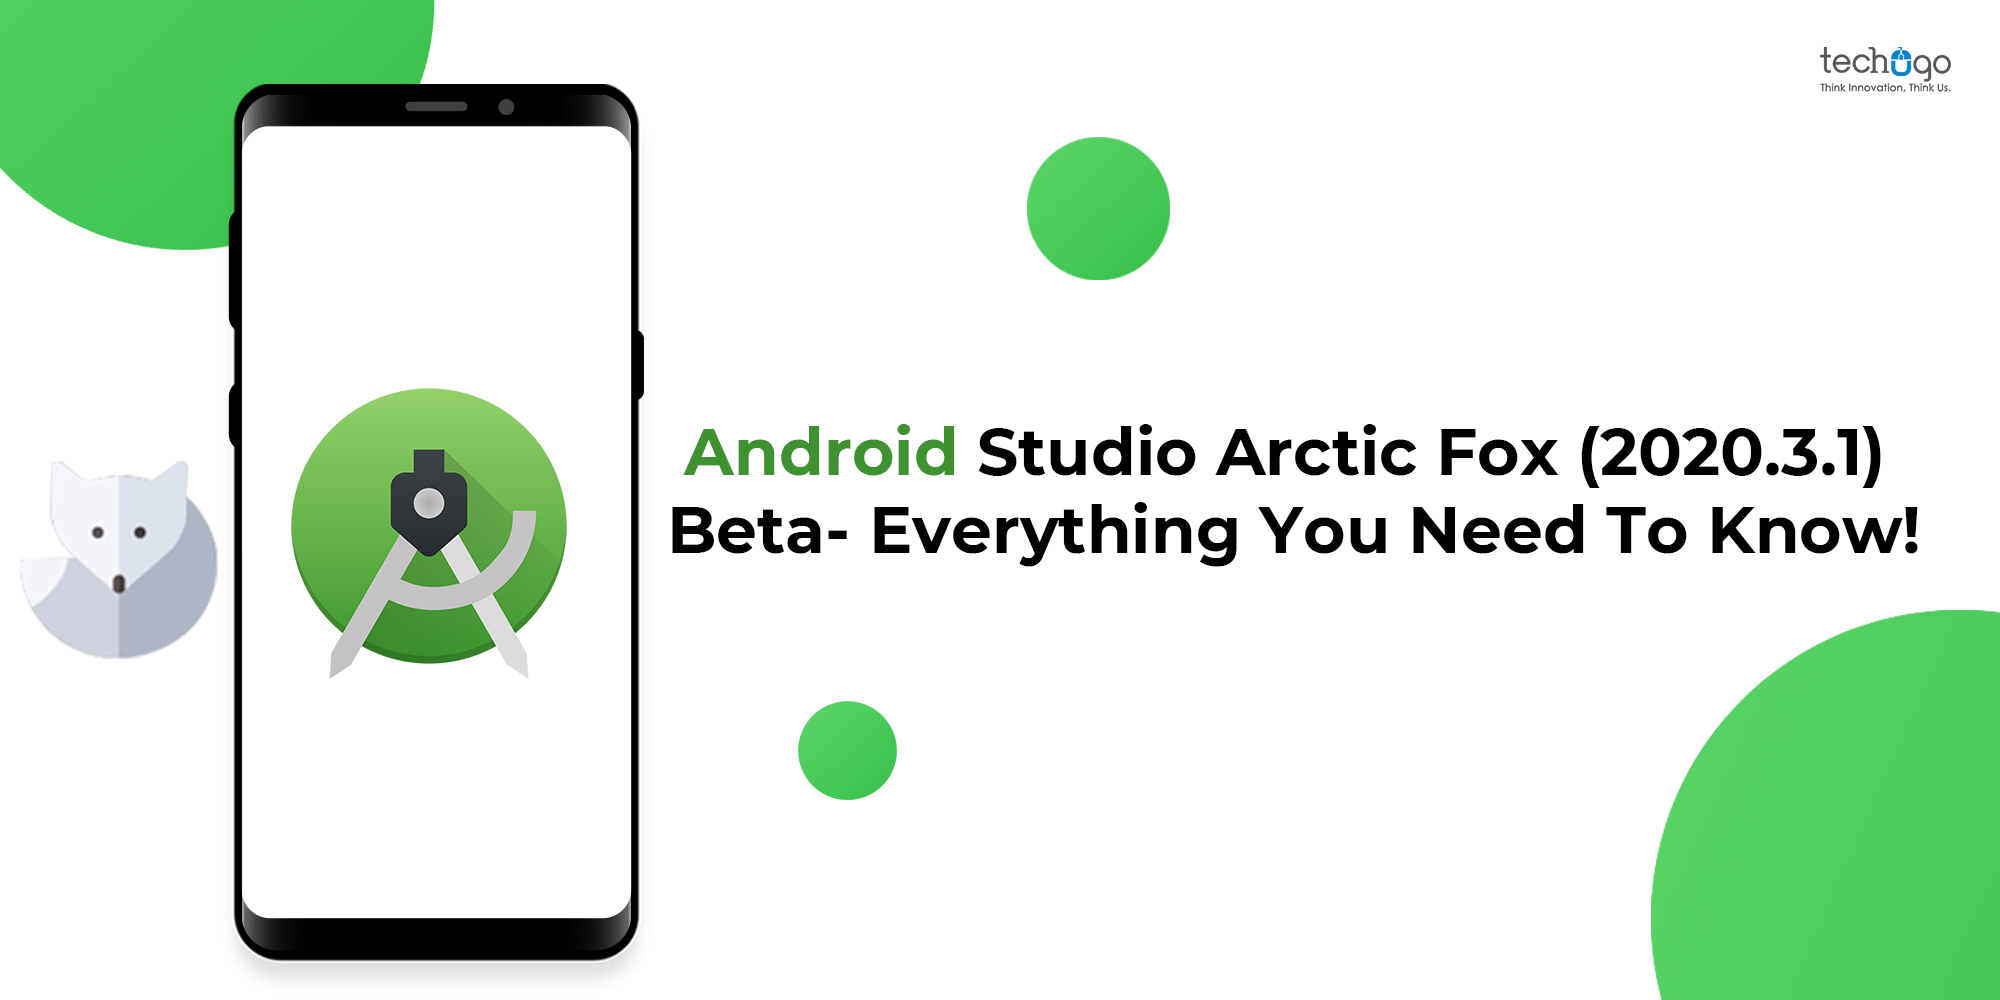 Android Studio Arctic Fox (2020.3.1) Beta- Everything You Need To Know!